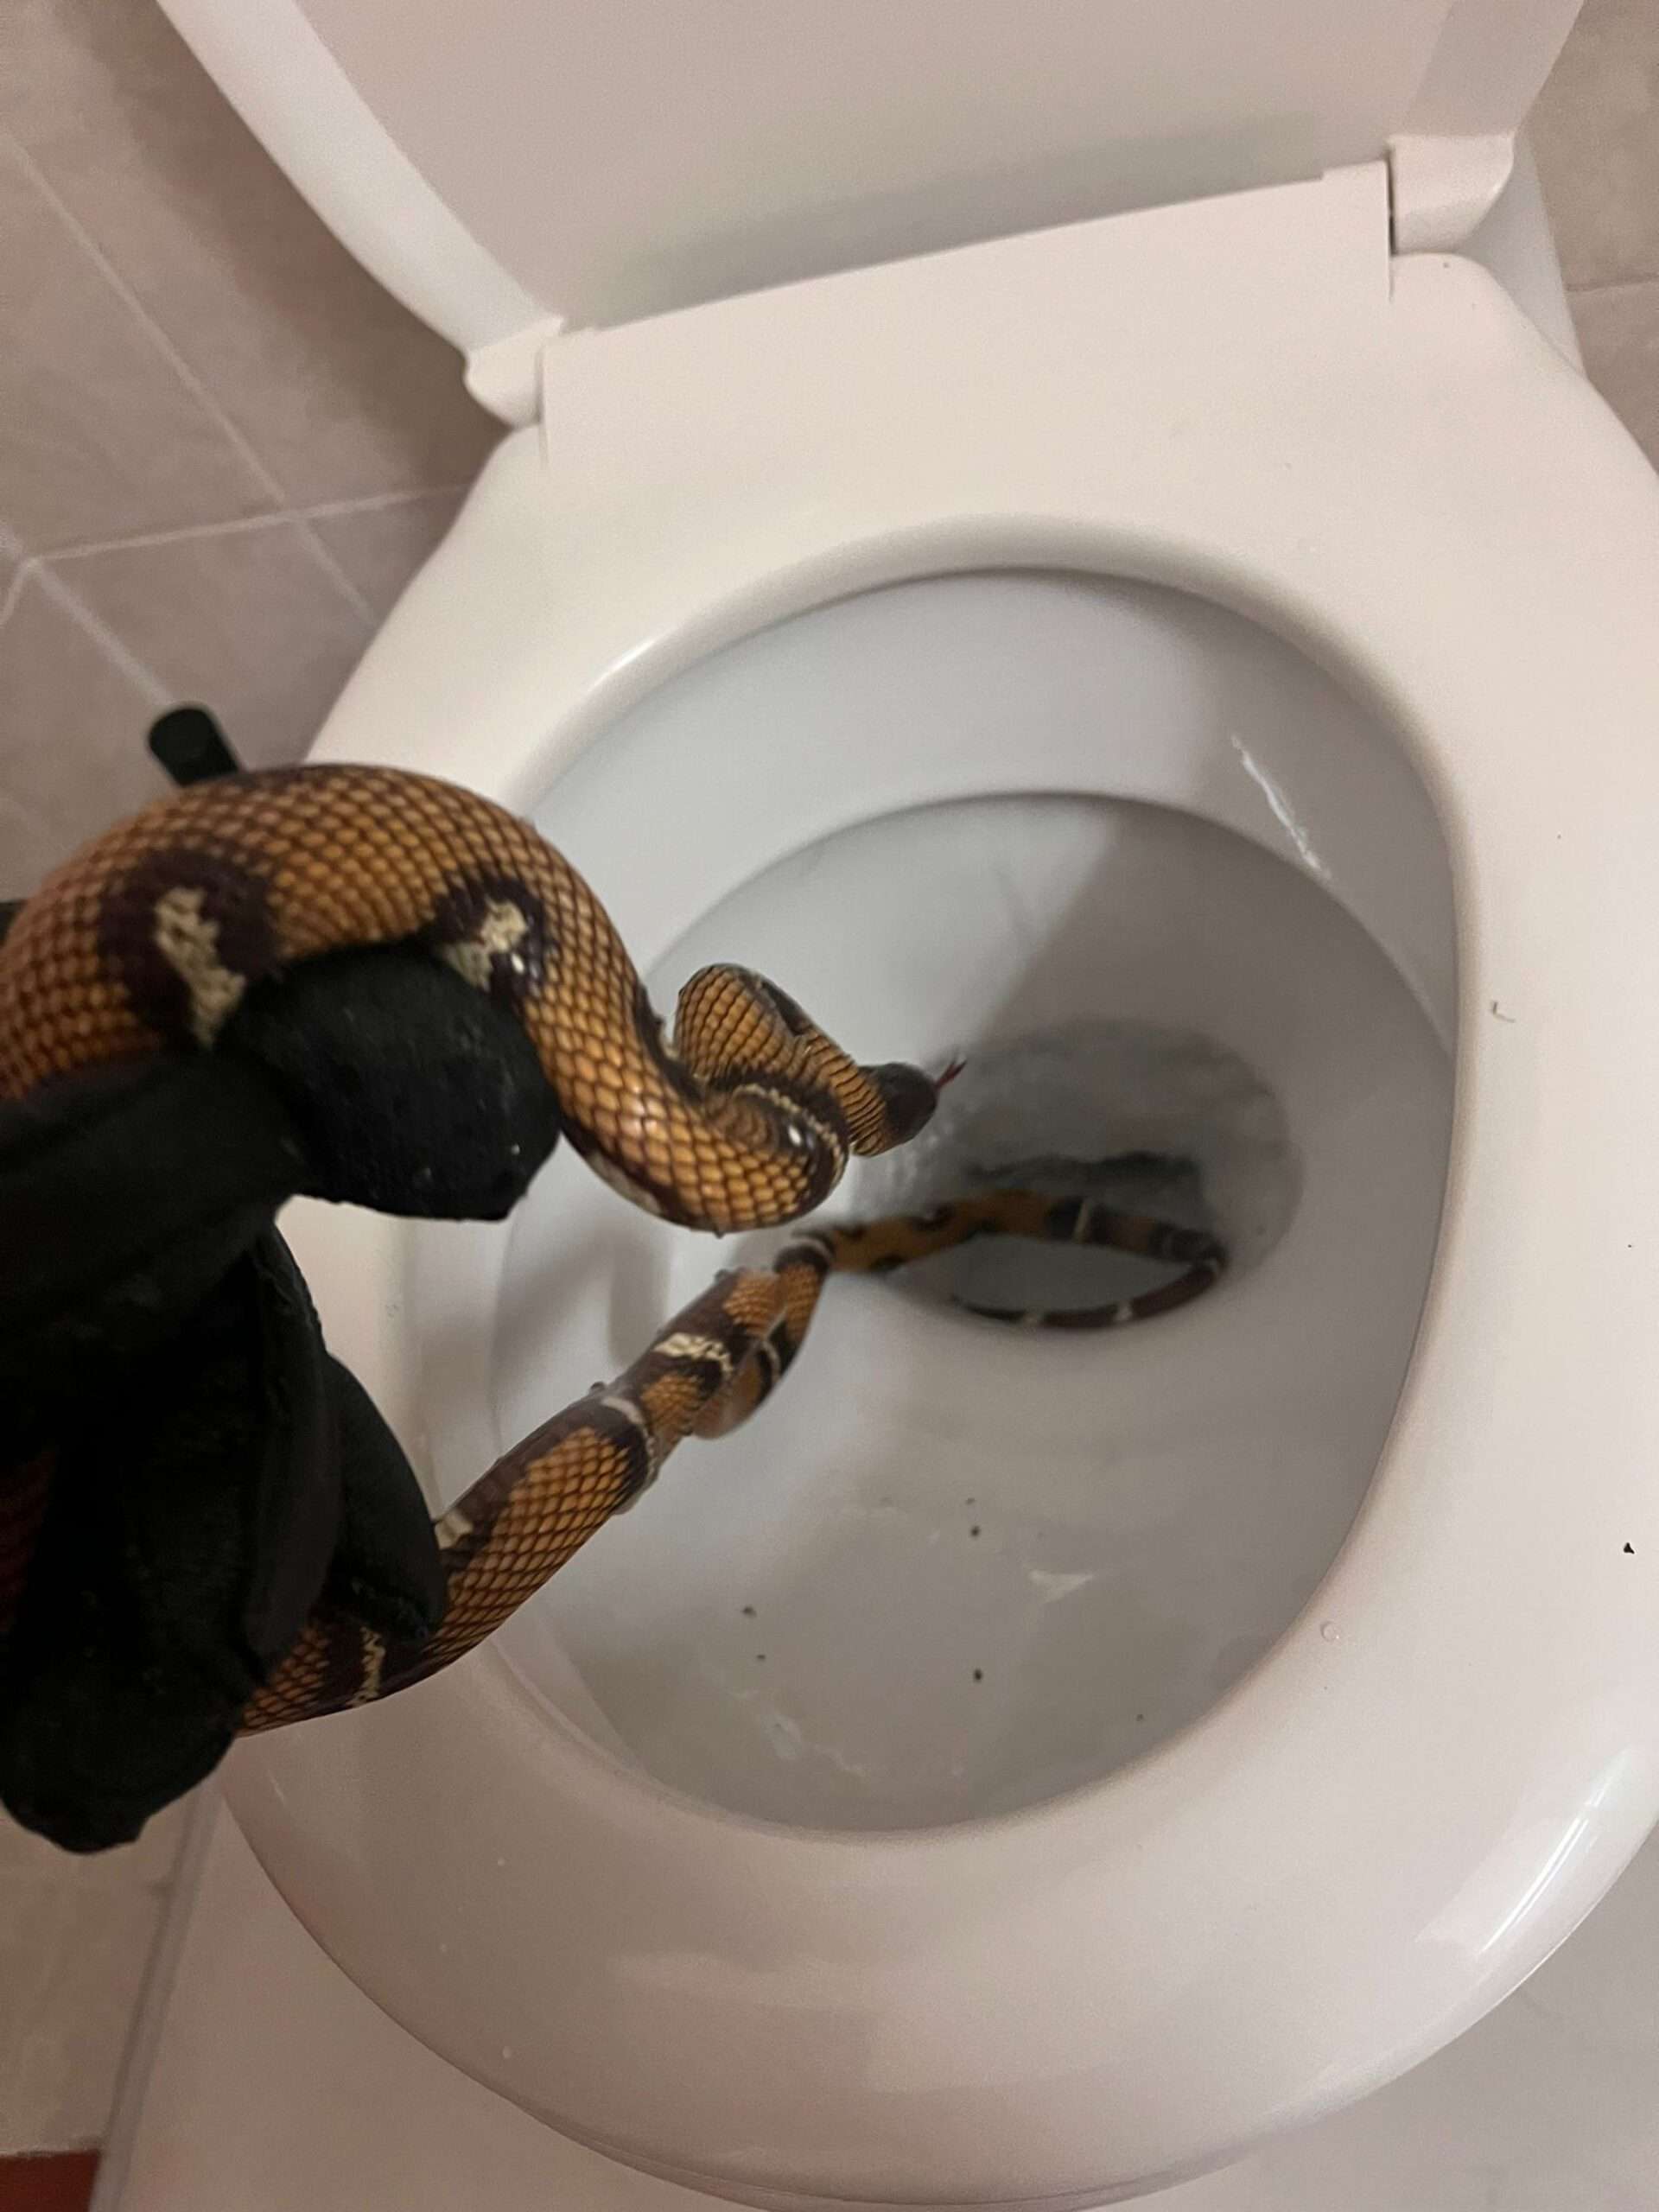 Read more about the article Horrified Holidaymaker Finds Snake In Hotel Loo